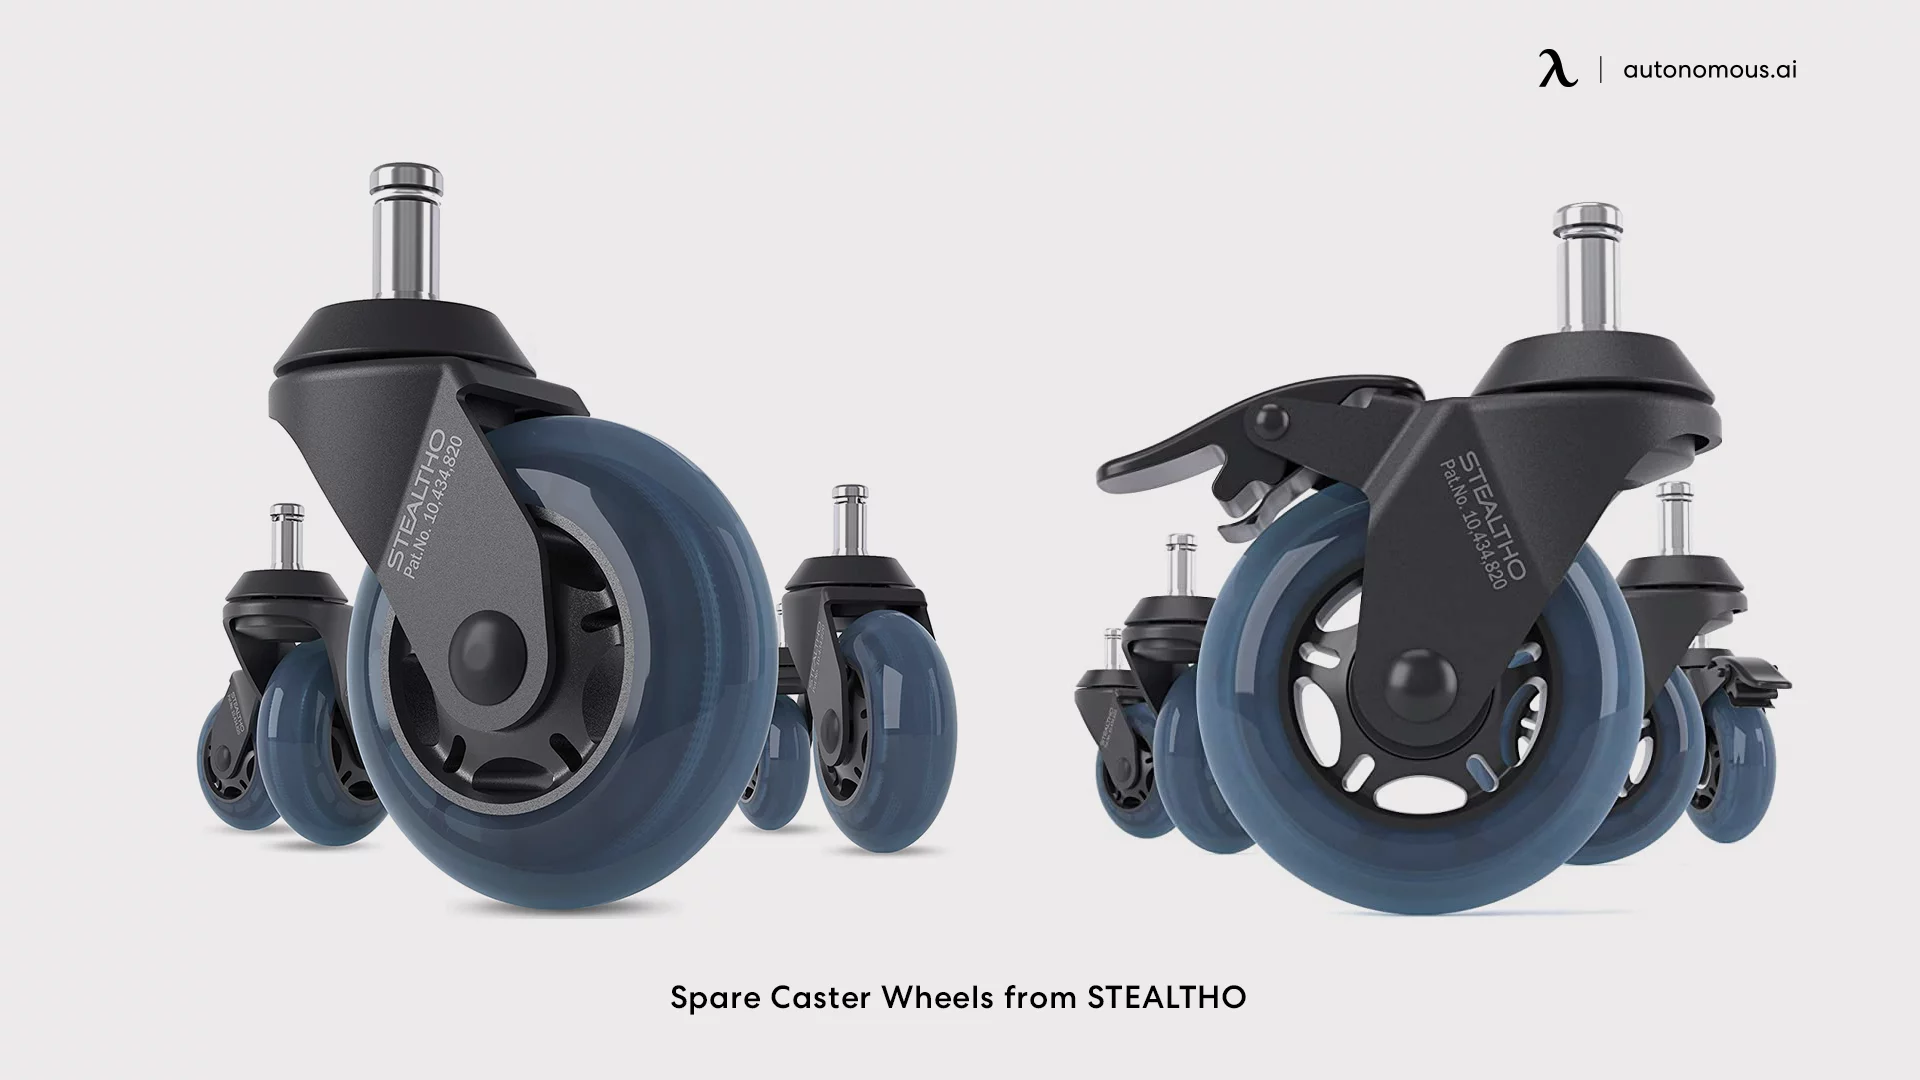 Spare Caster Wheels from STEALTH